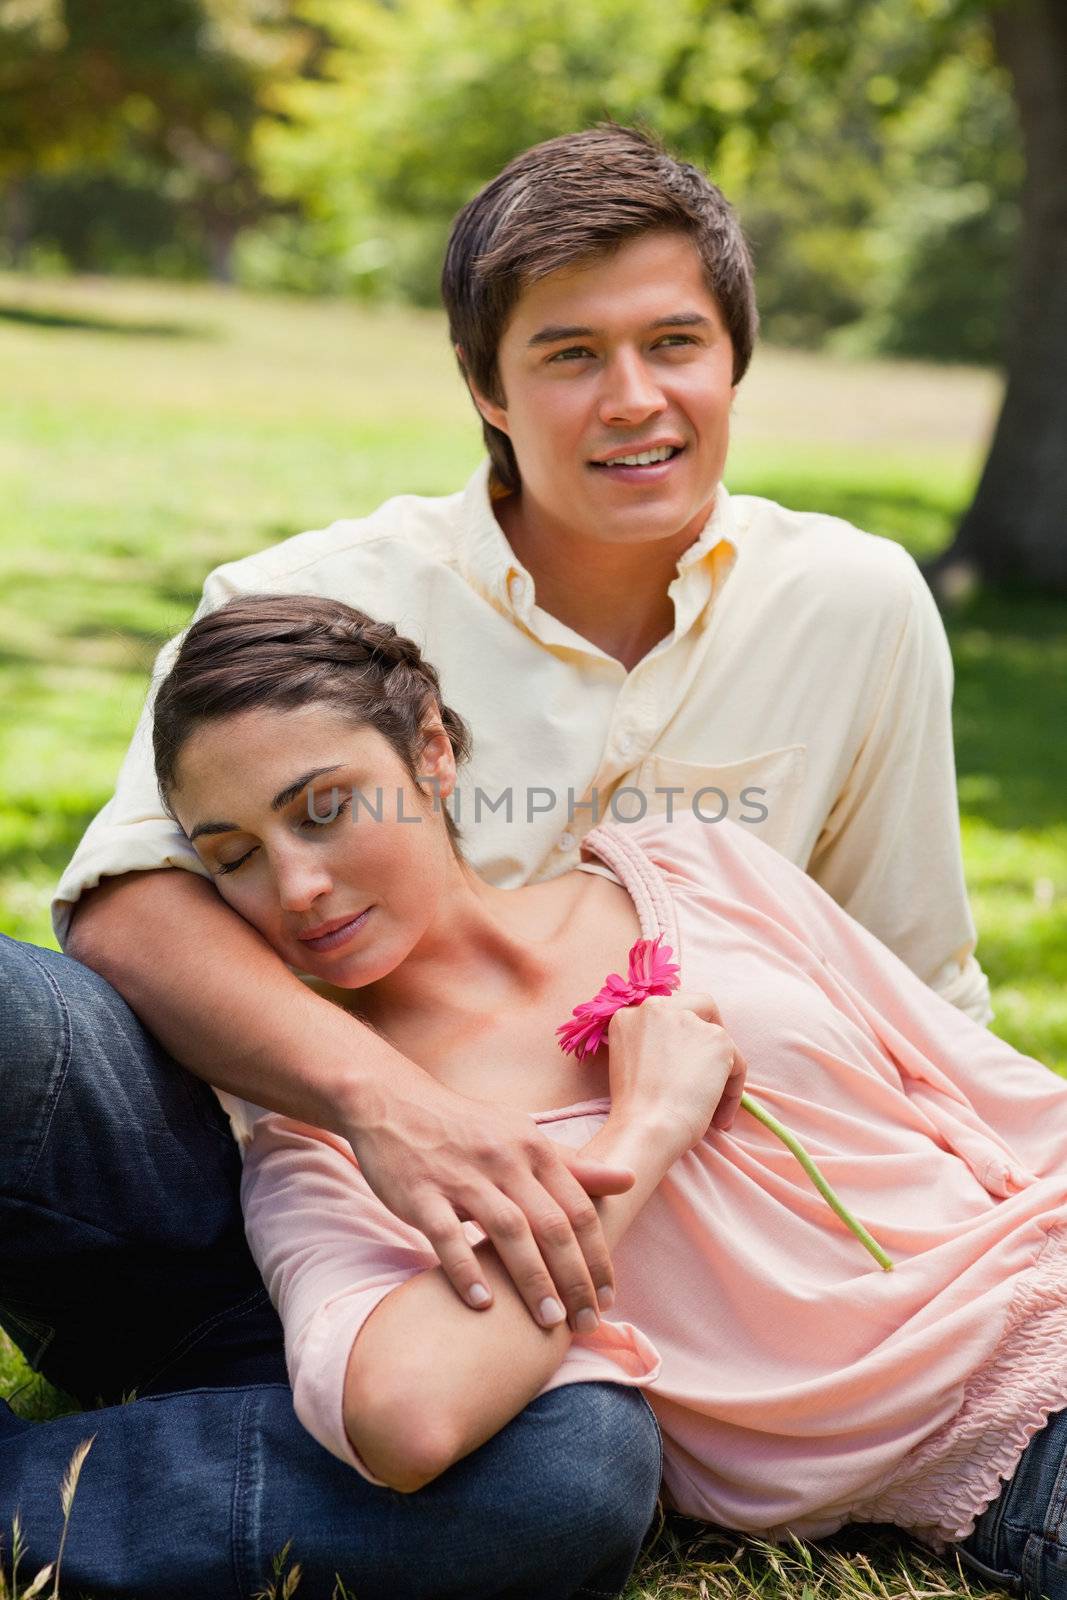 Woman with her eyes closed while holding a flower as she rests against her friend who is sitting in the grass